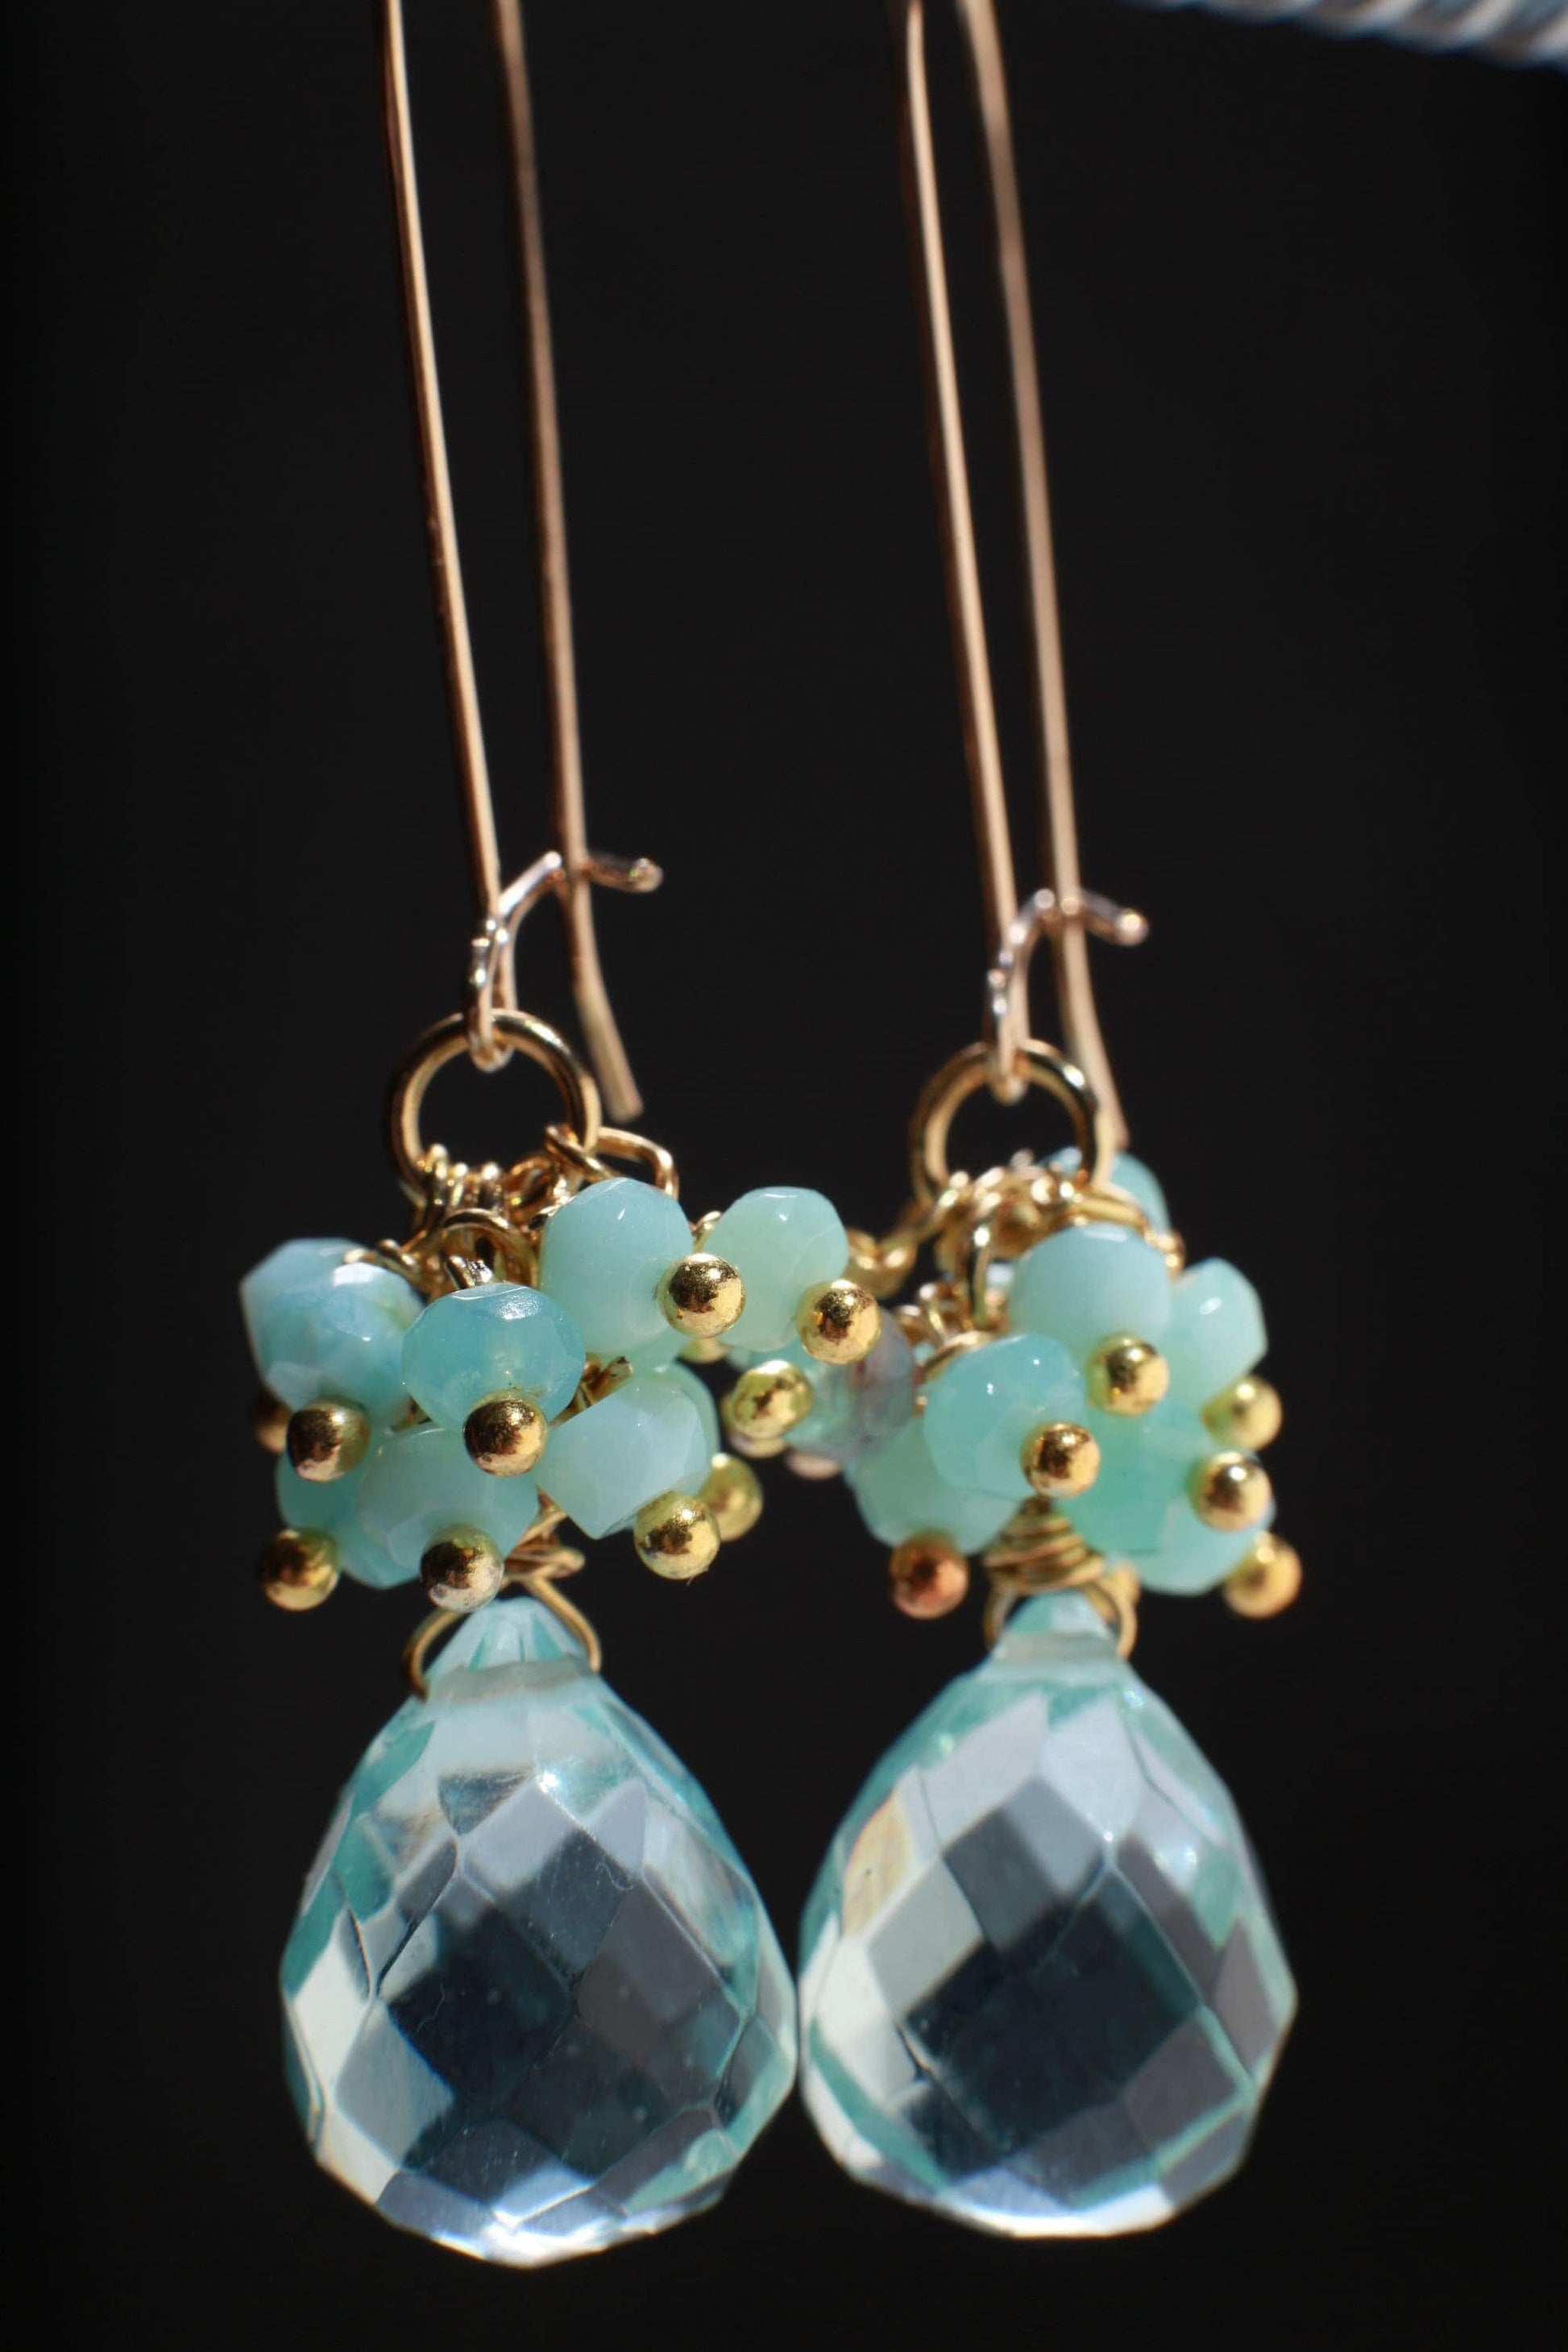 Natural Peruvian blue Opal Cluster Earring with Aqua Quartz Briolette in 14K Gold Filled Kidney Ear Wire, Soothing Gem, Boho, Beach Earring